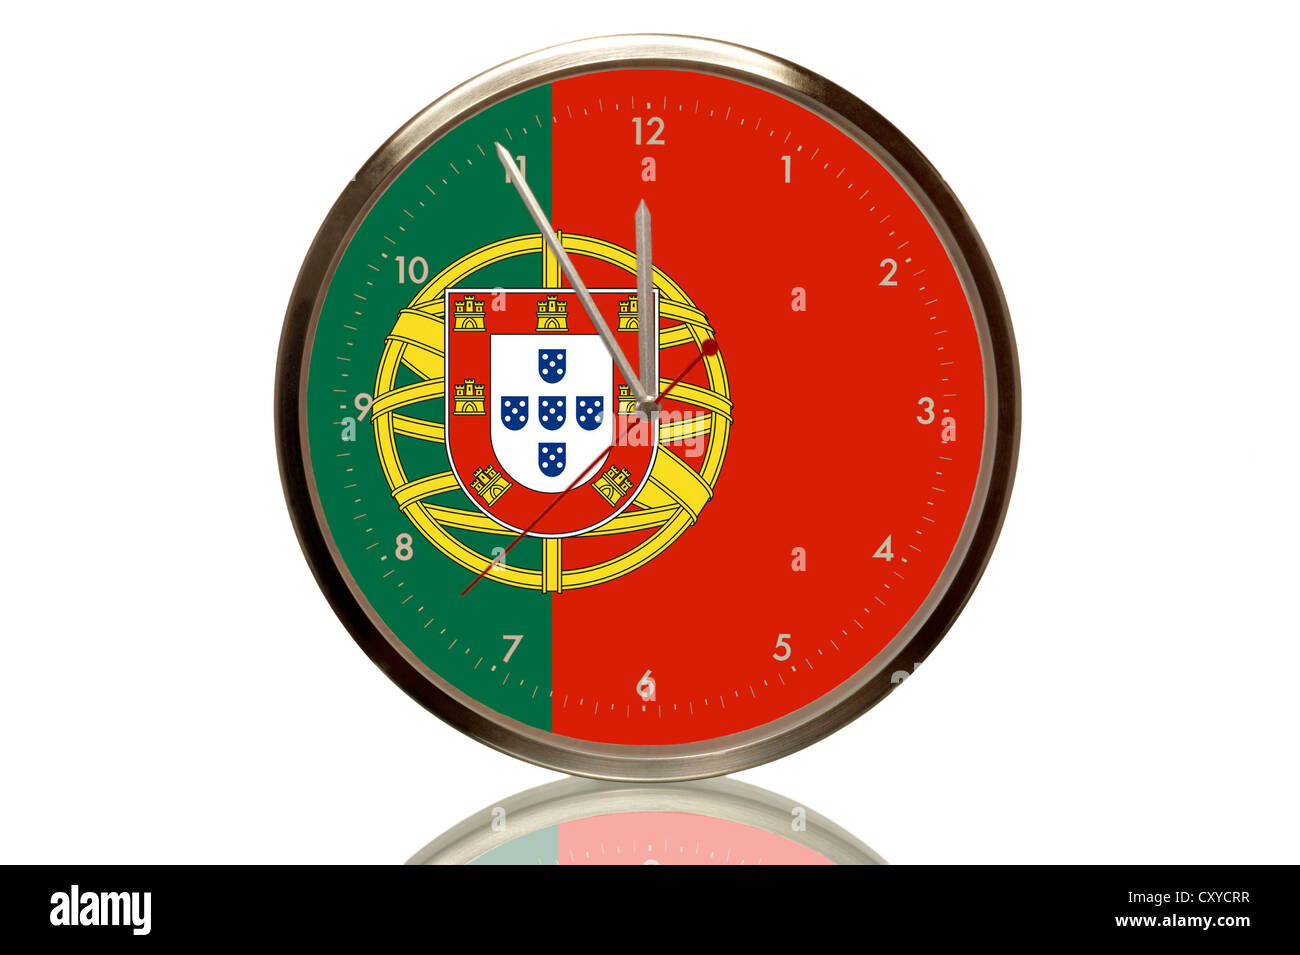 Clock with the Portuguese flag, 5 minutes to twelve, eleventh hour, symbolic image for the euro crisis Stock Photo